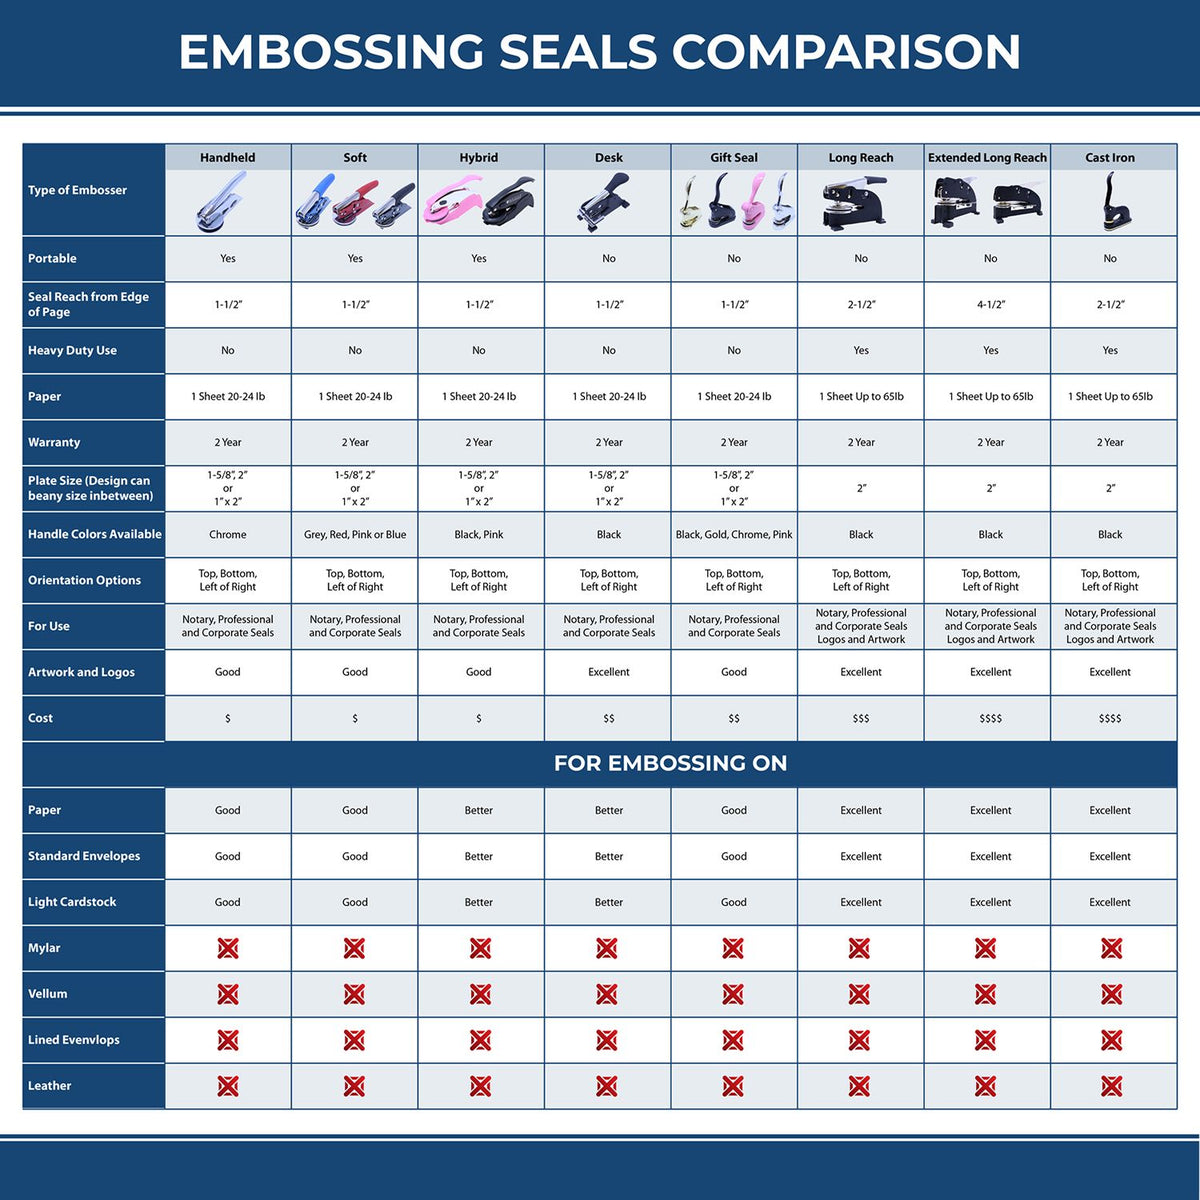 A comparison chart for the different types of mount models available for the Texas Engineer Desk Seal.